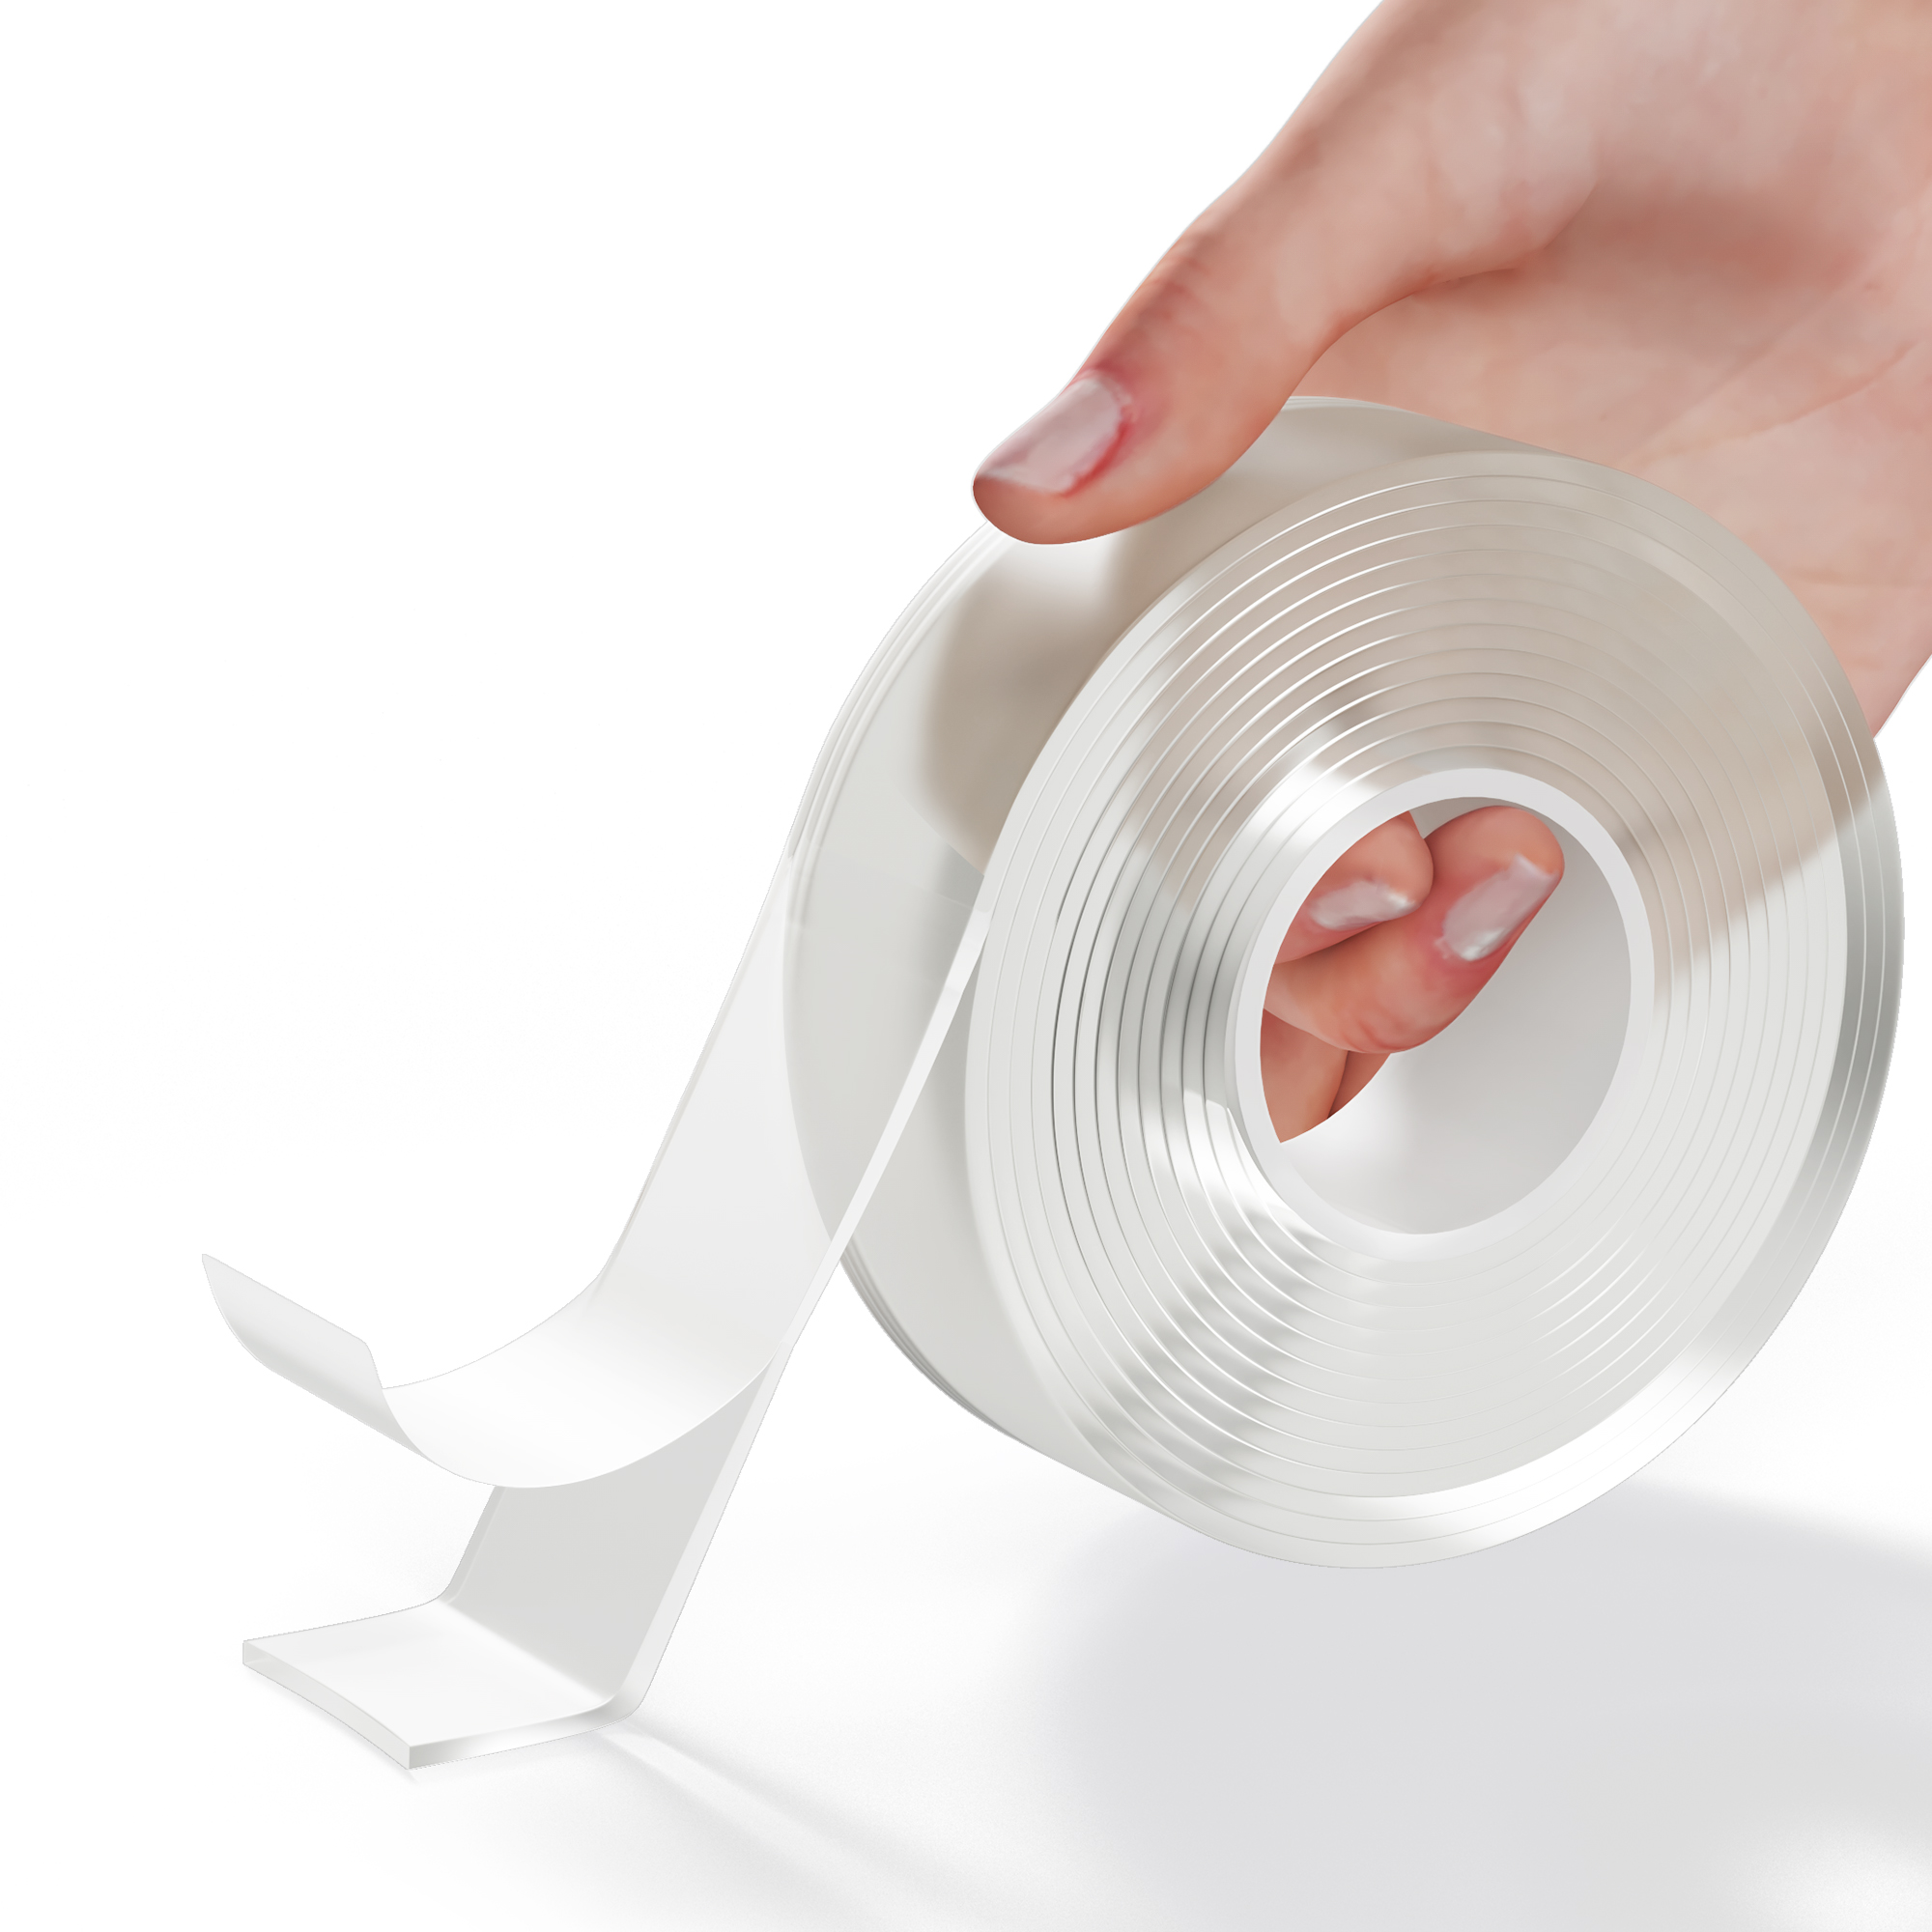 Heavy duty double sided tapes - Flowstrip® Limited